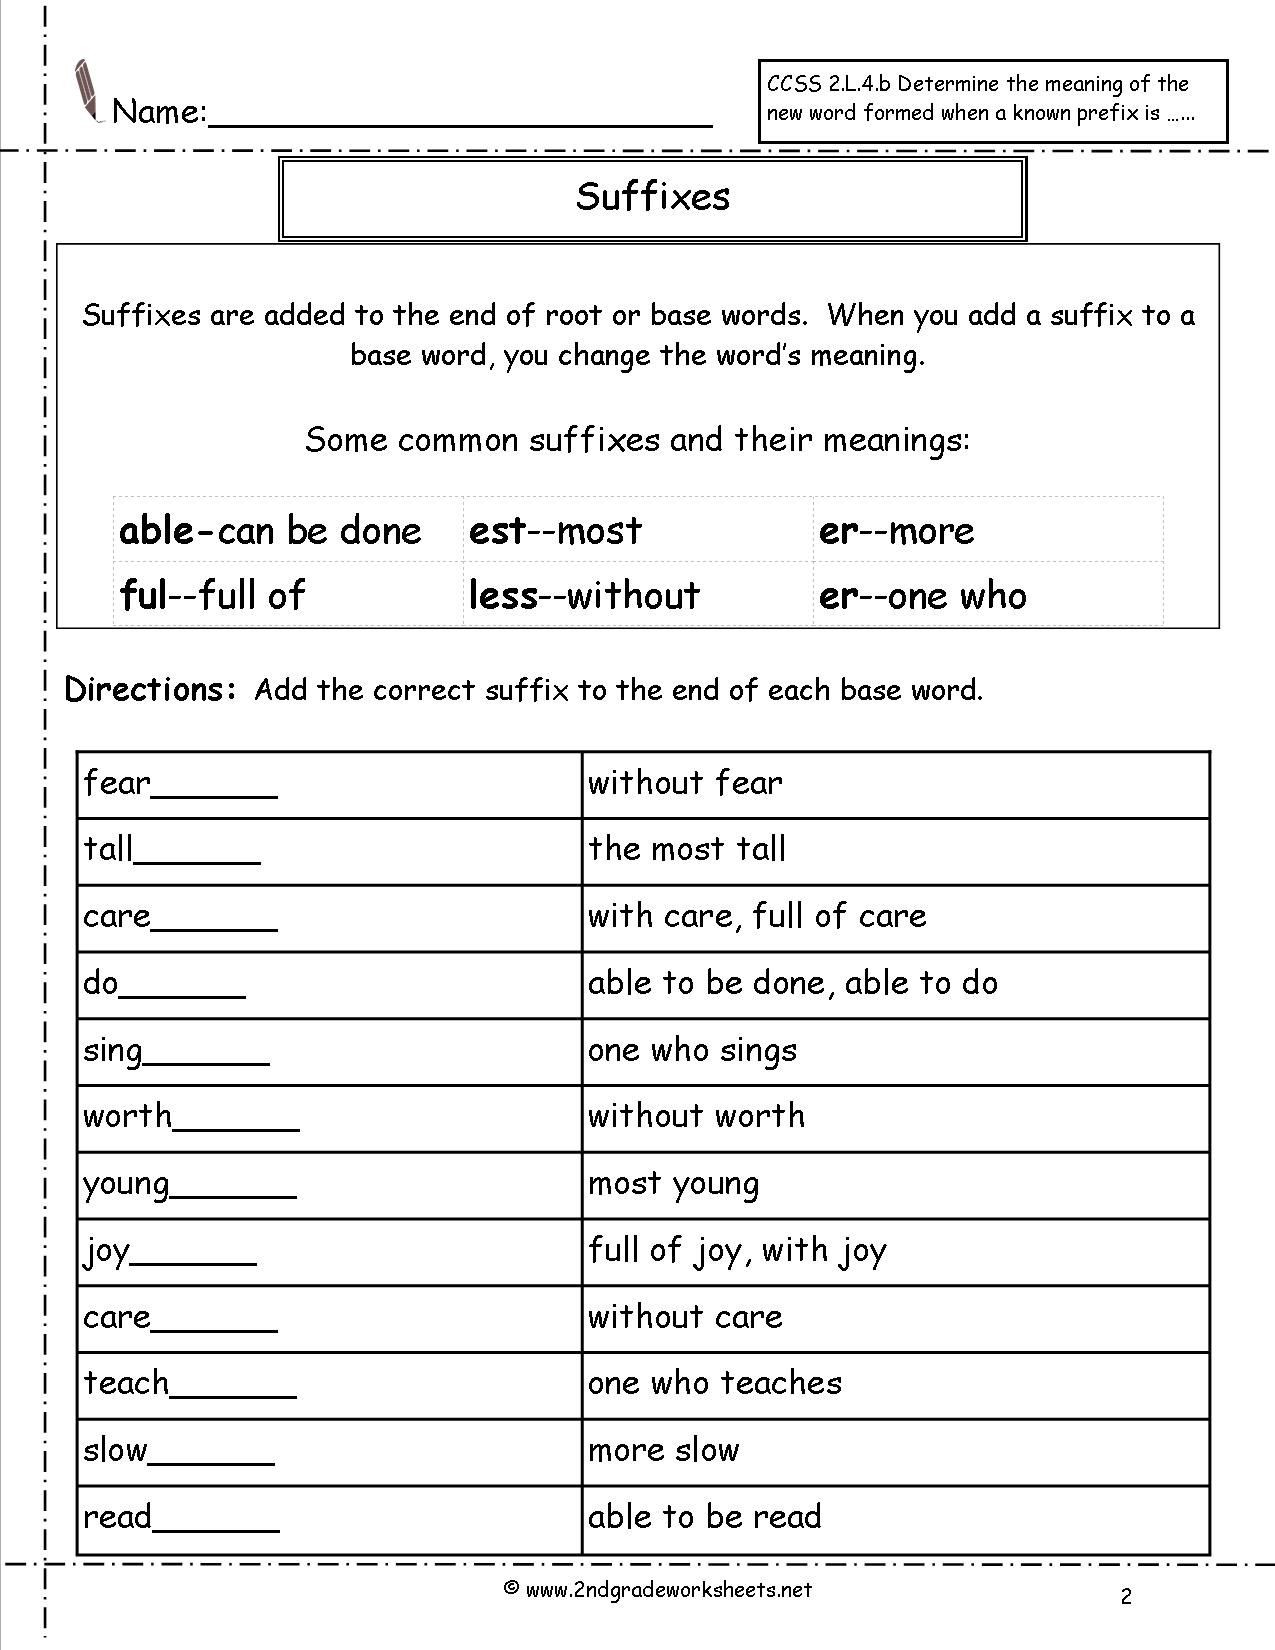 Suffixes Worksheets 4th Grade 41 Innovative Prefix Worksheets for You with Images